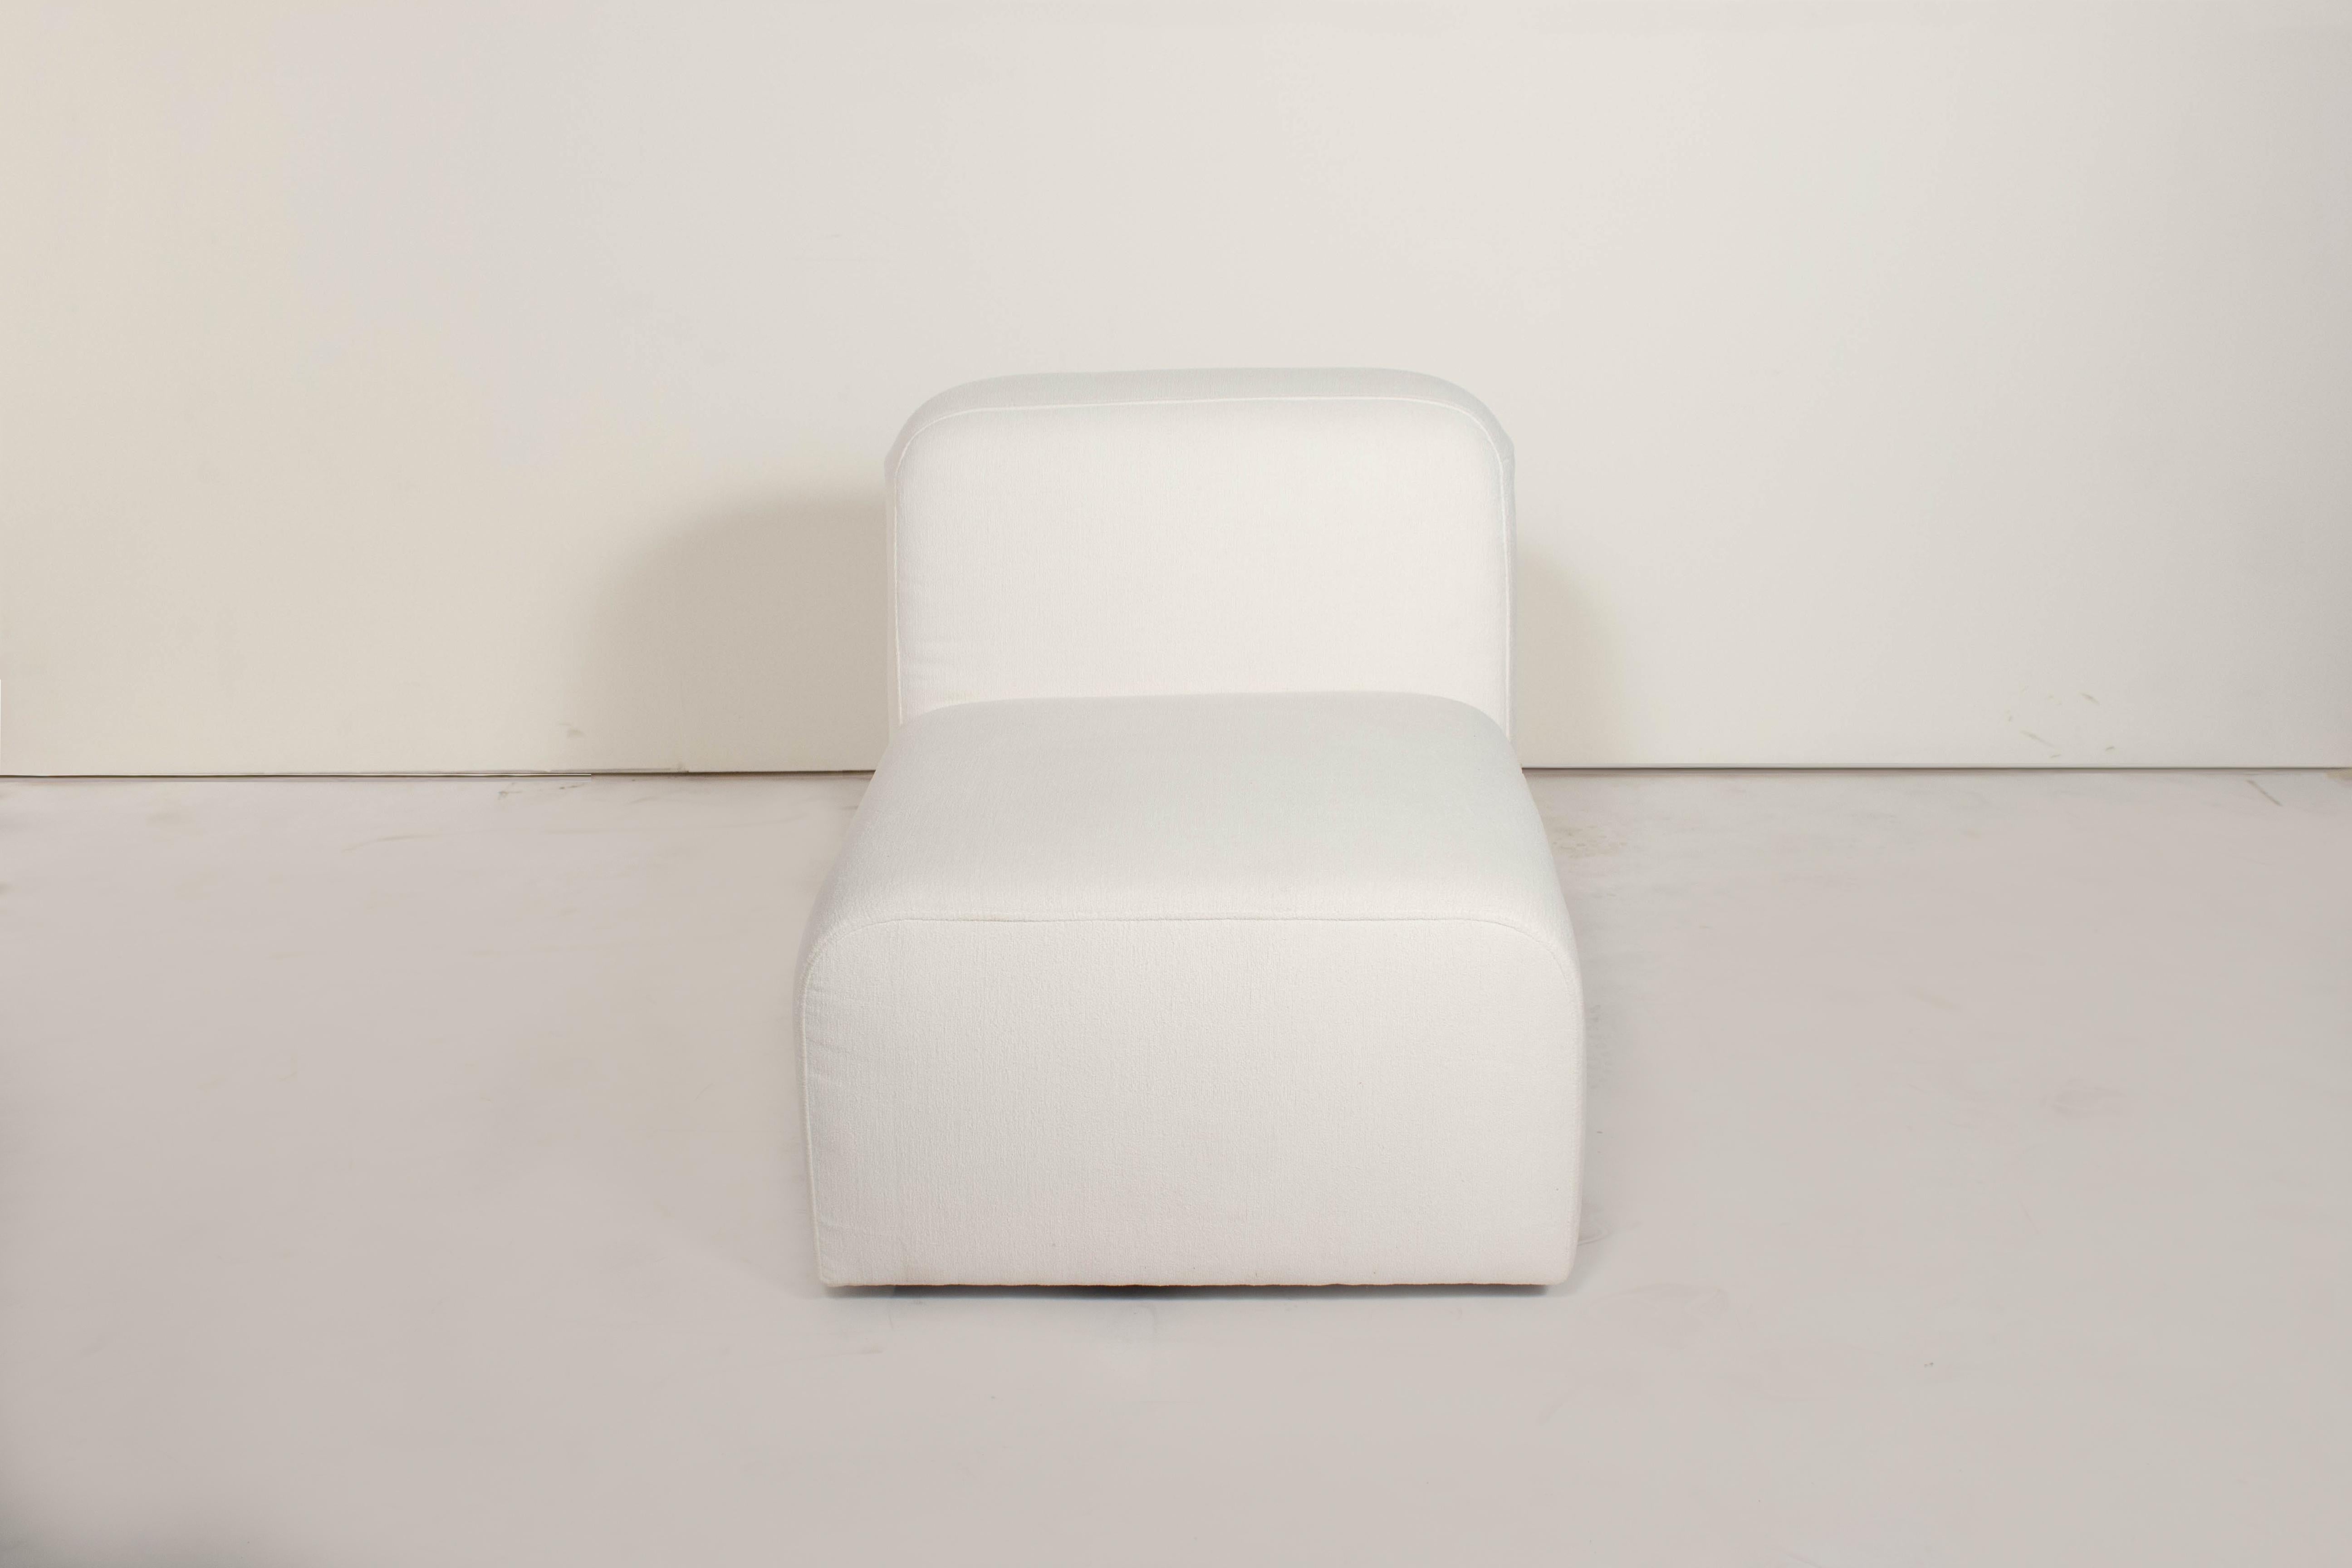 Chinese Yam Sofa by Sun at Six, Minimalist Sofa in Snow For Sale